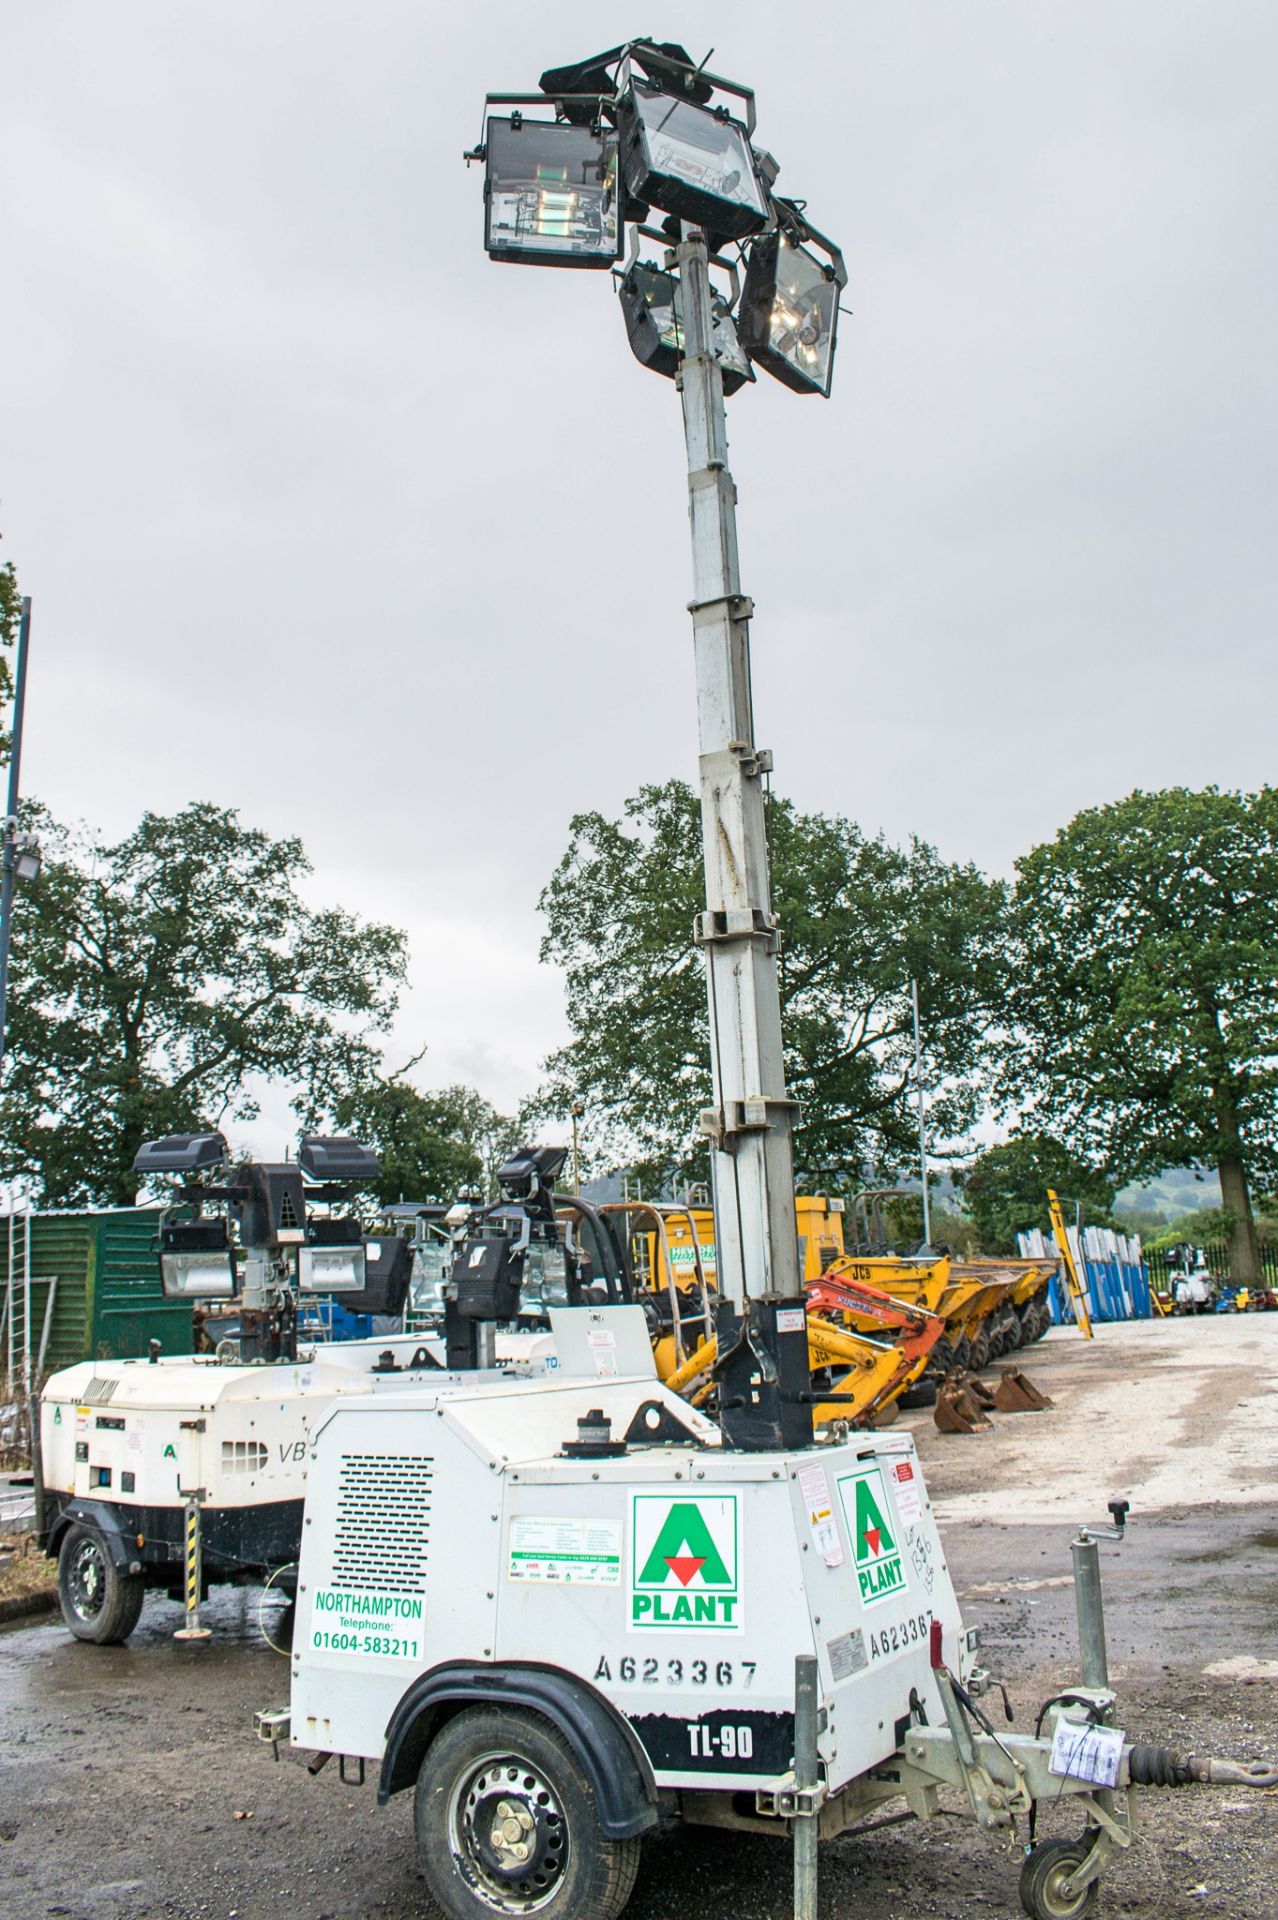 SMC TL-90 diesel driven mobile lighting tower Year: 2013 S/N: 1310413 Recorded Hours: 2244 A623367 - Image 5 of 8